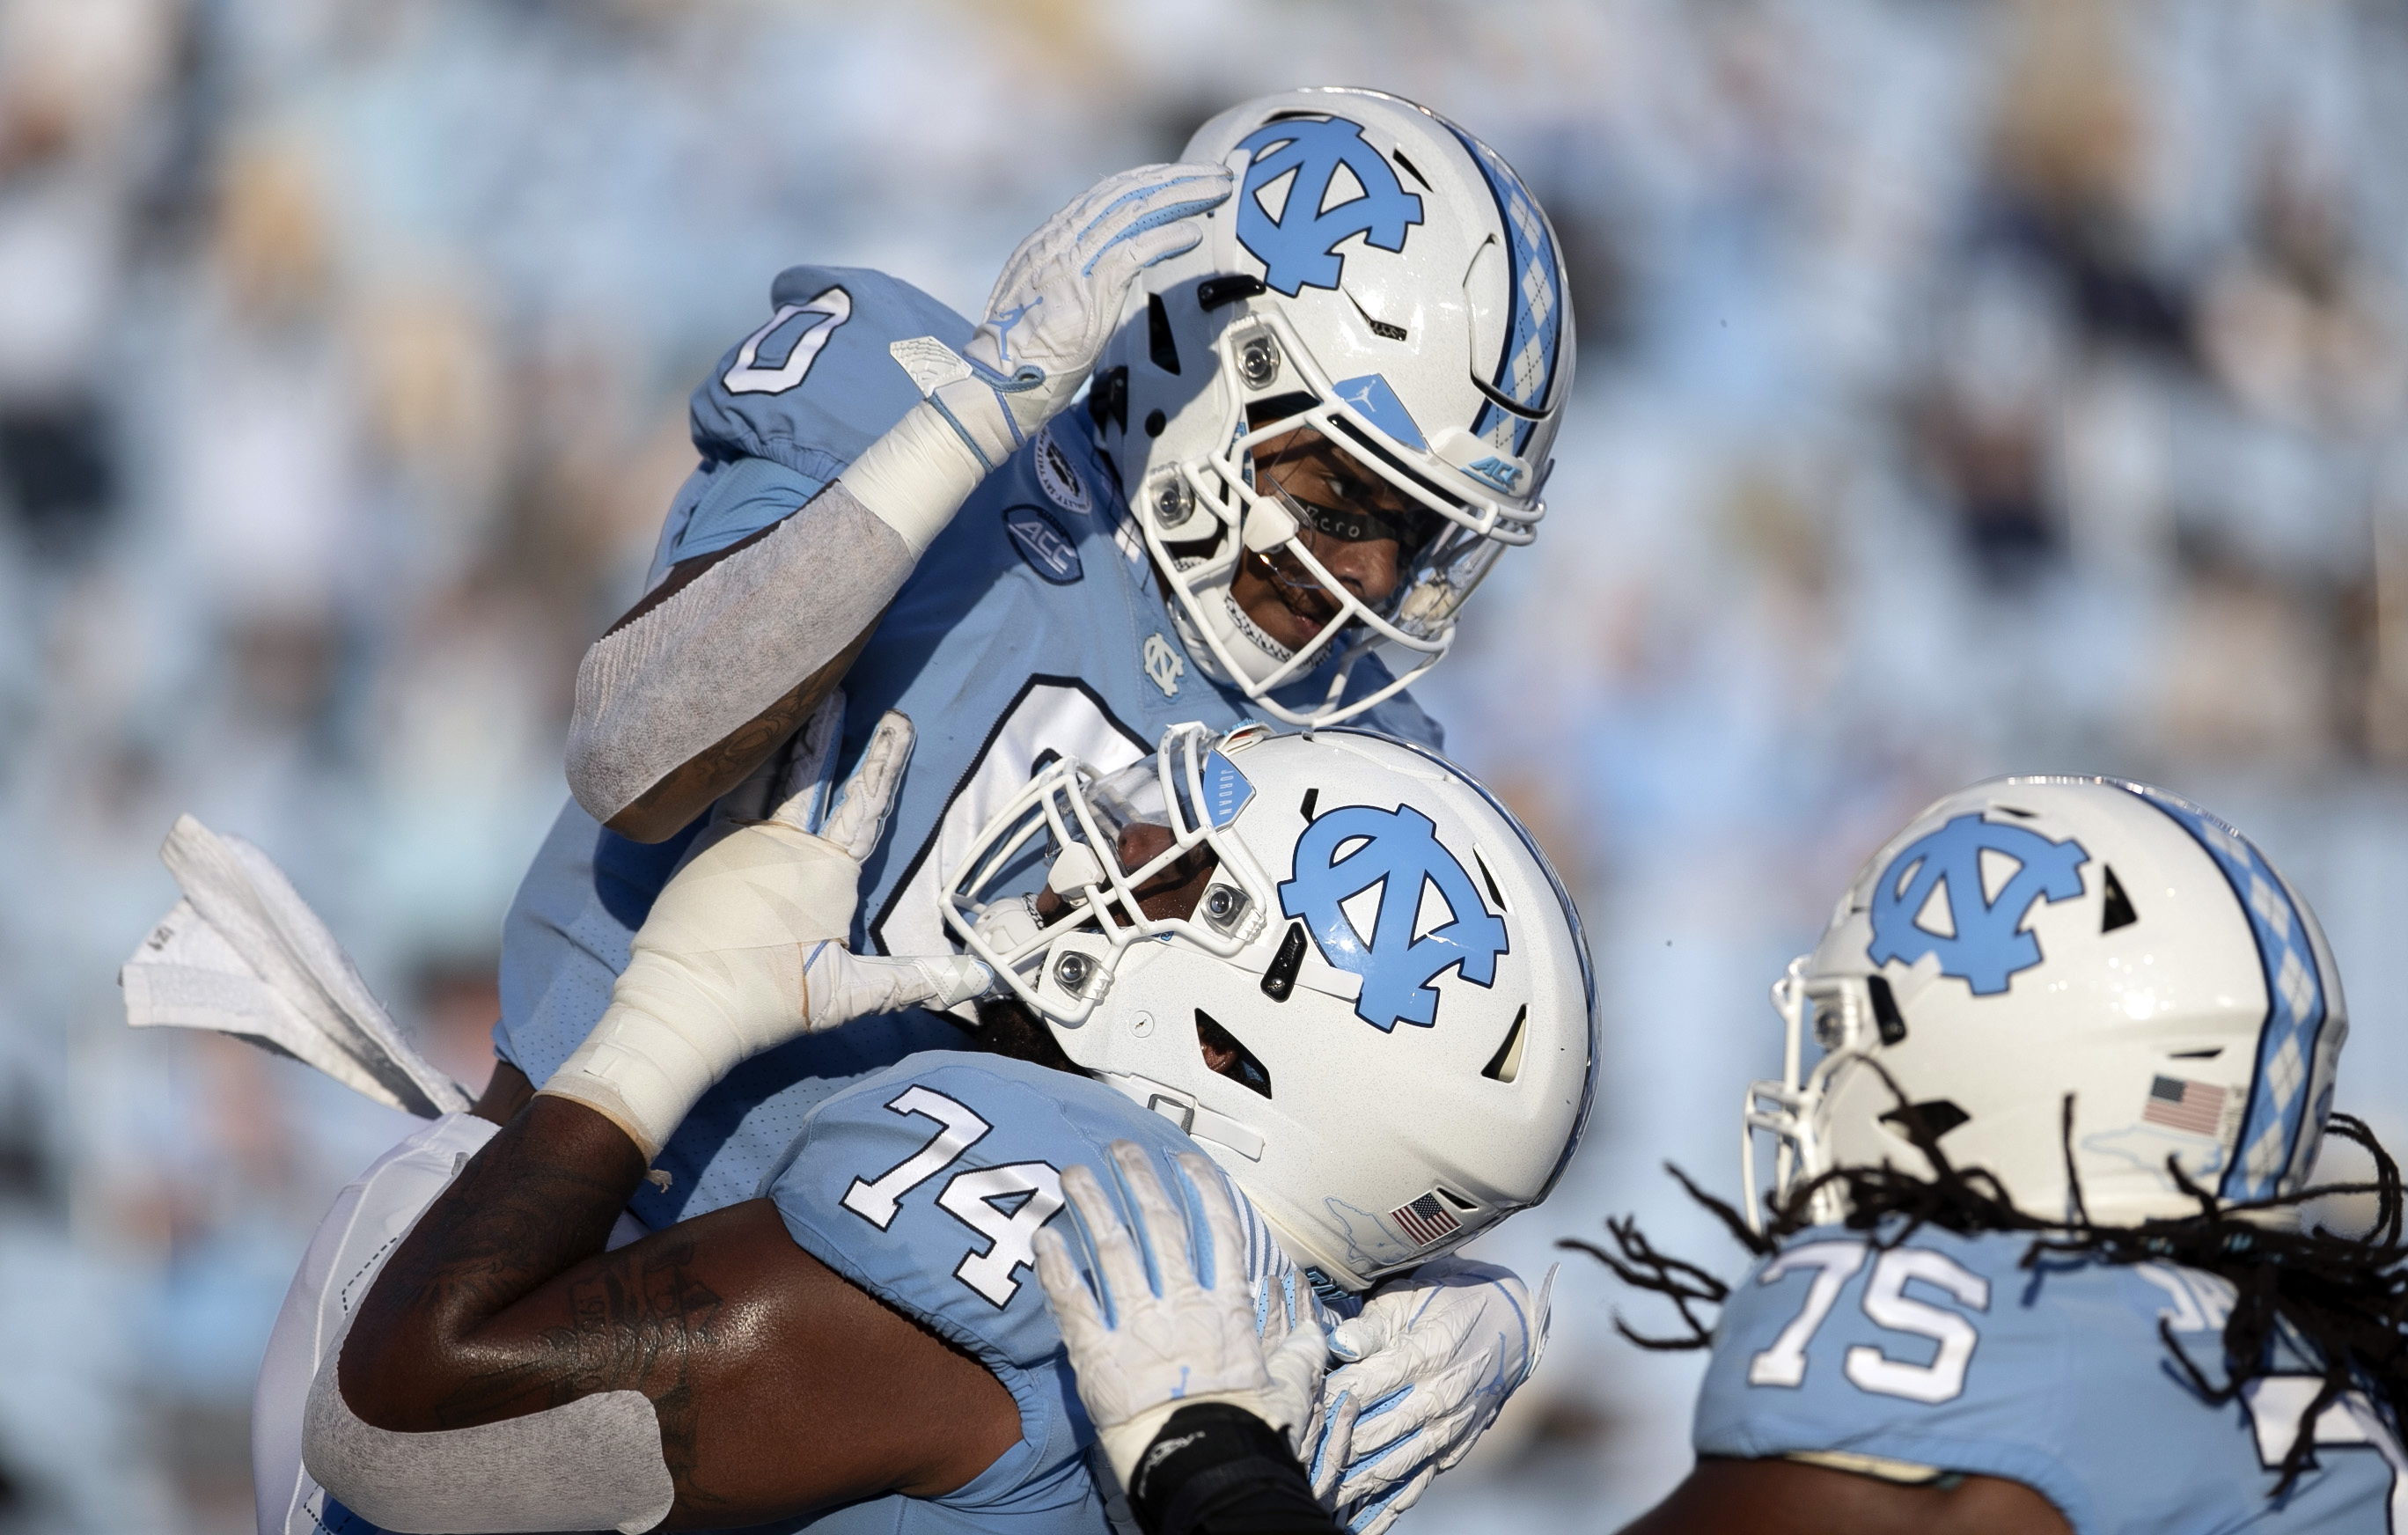 UNC Football Reveals Jersey Numbers for LaptrinhX / News